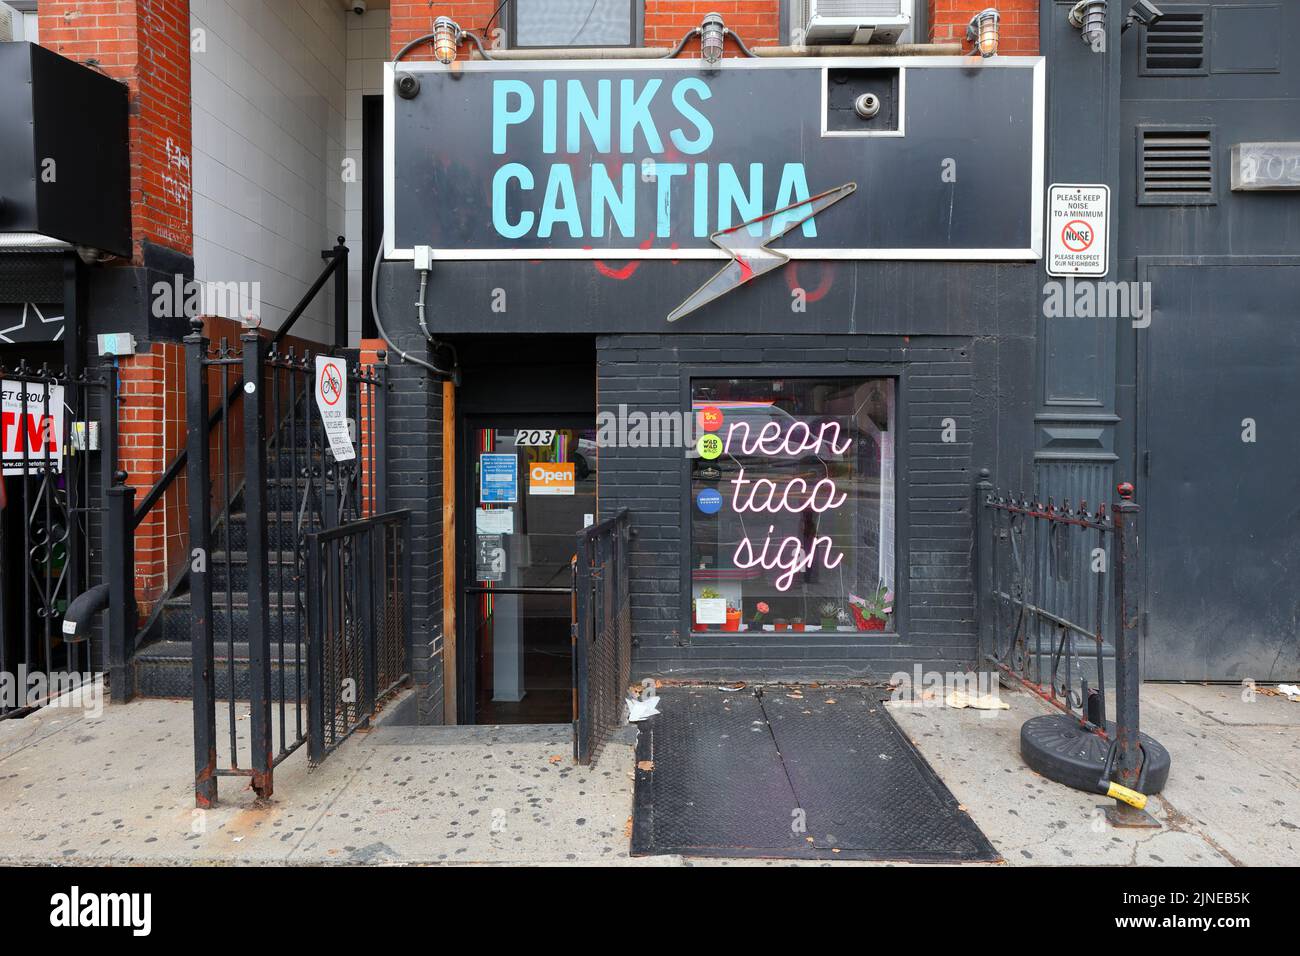 Pinks Cantina, 203 Chrystie St, New York, NYC storefront photo of a Mexican fusion restaurant in the Lower East Side of Manhattan. Stock Photo